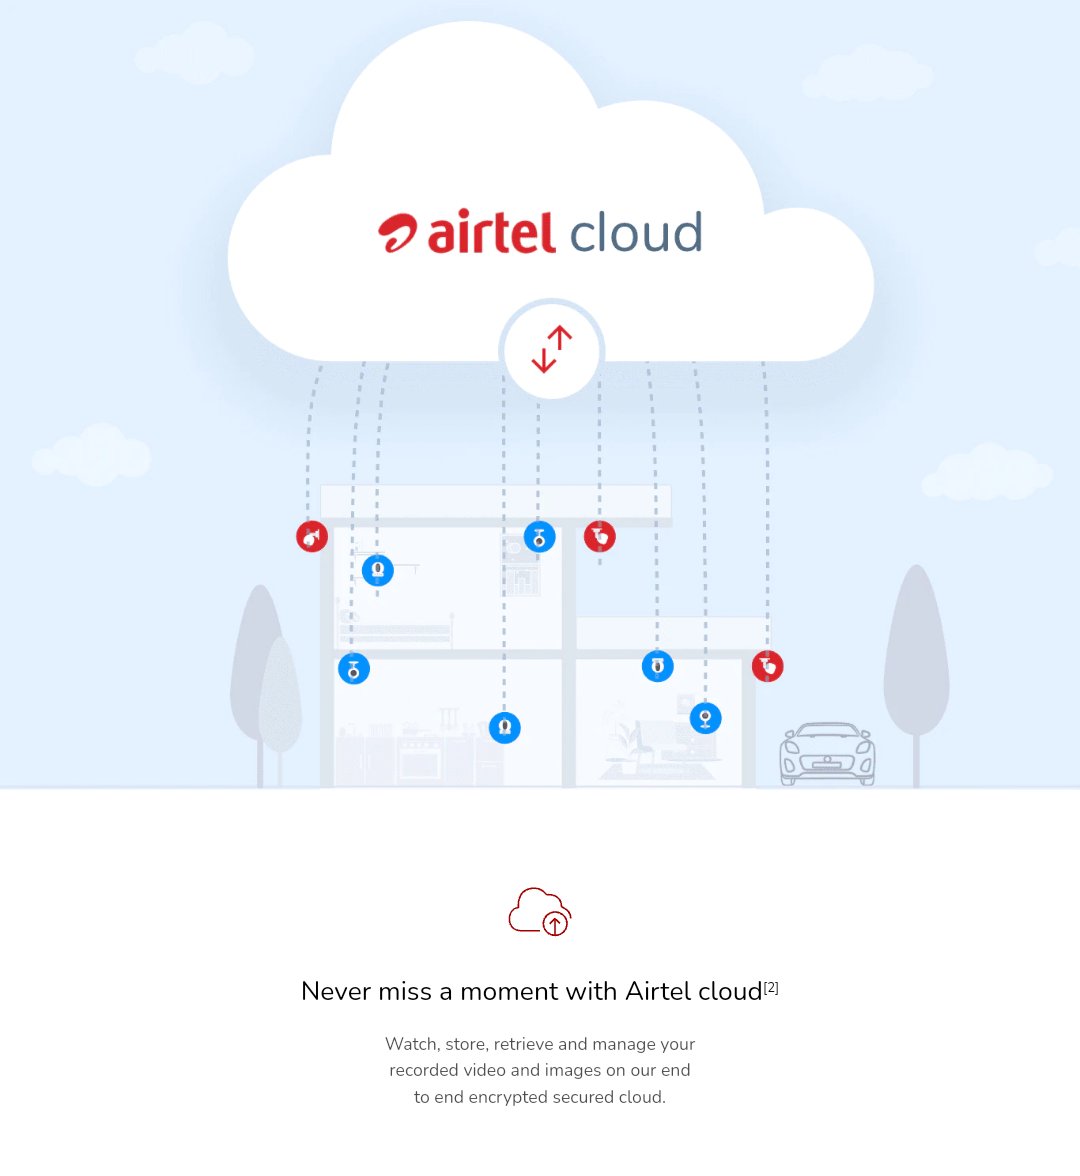 Airtel Xsafe

Never miss a moment with Airtel Cloud.

Please visit your nearest Airtel store to know more

Airtel Store
Add:- M 5 Block, Radial Rd 5, Connaught Place, New Delhi, Delhi 110001

#AirtelXsafe 
#cctvfootage
#Cannaughtplace